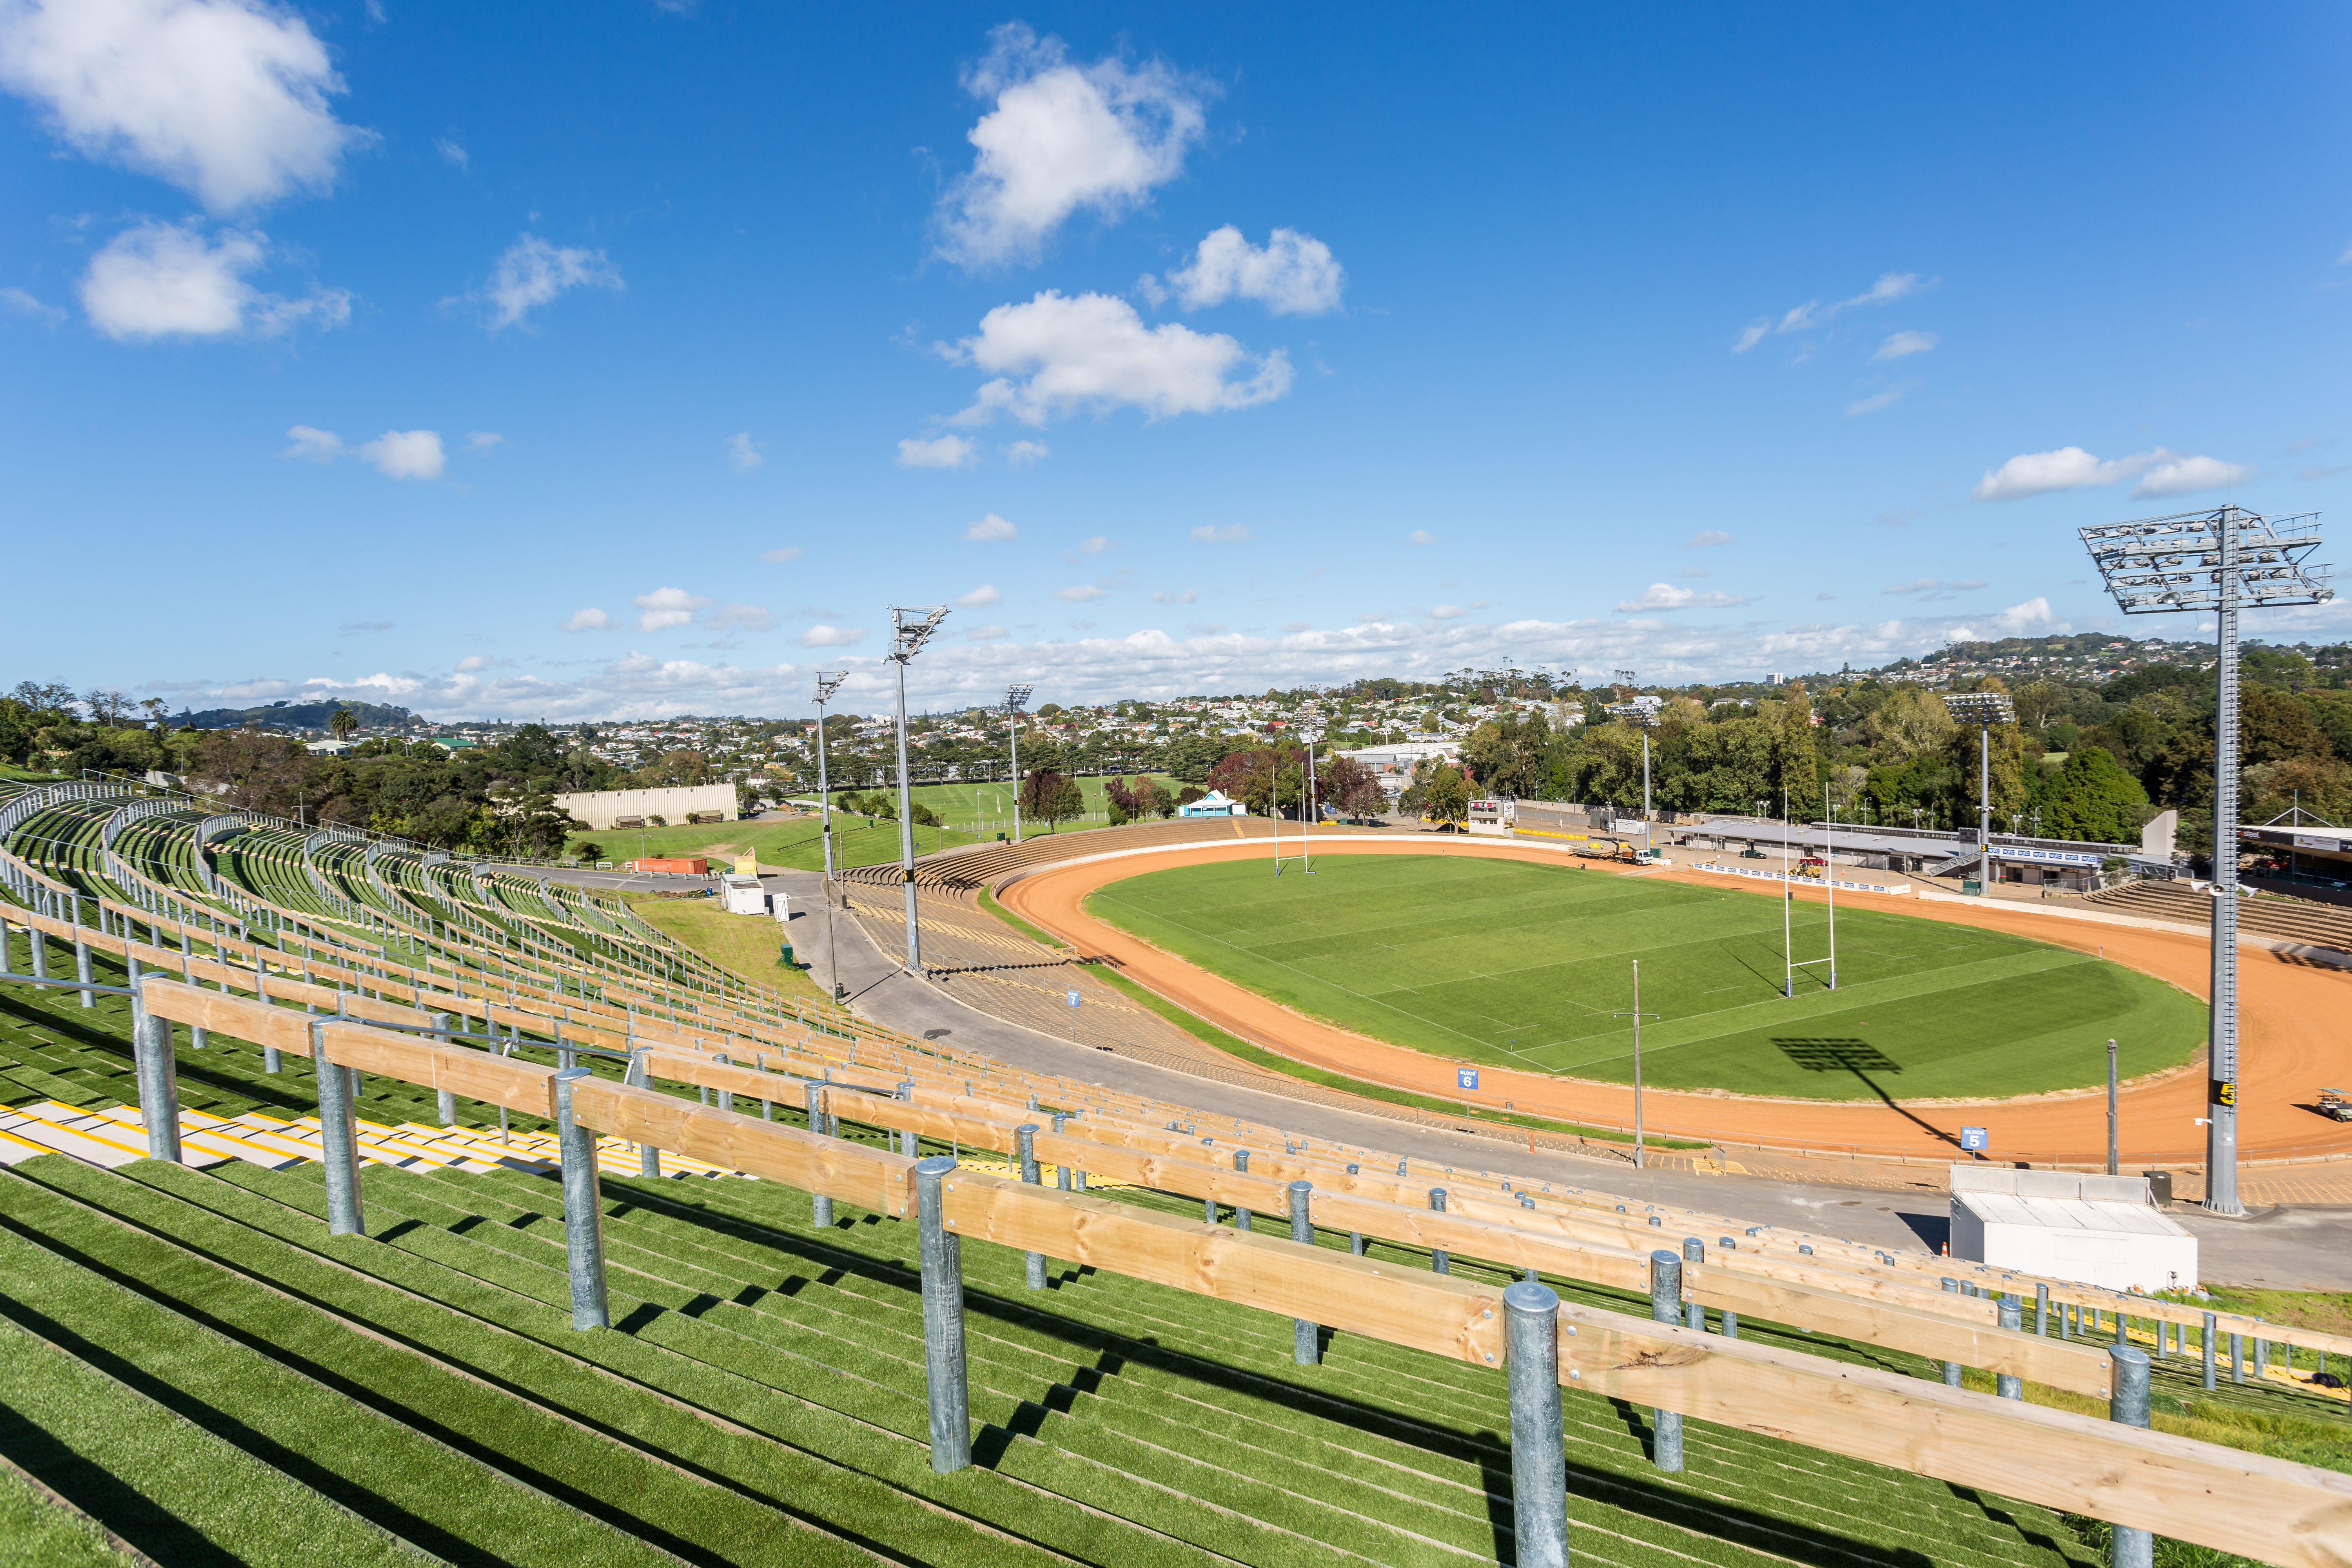 RFA announces successful tender for Speedway operations at Western Springs Stadium